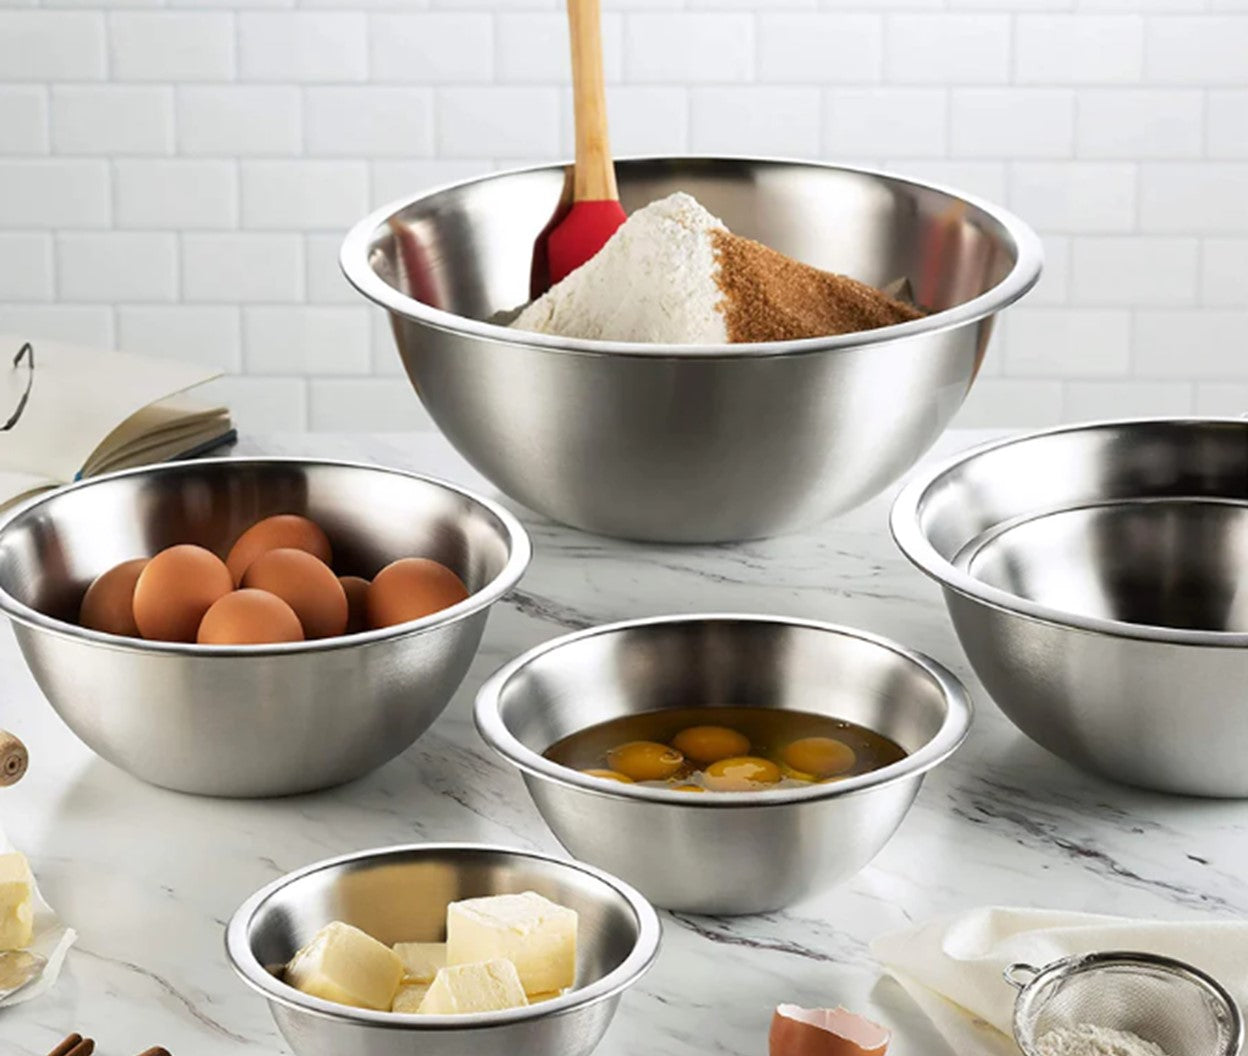 Lexi Home Heavy Duty Stainless Steel German Mixing Bowl Set - 3 Large Nested Mixing Bowls